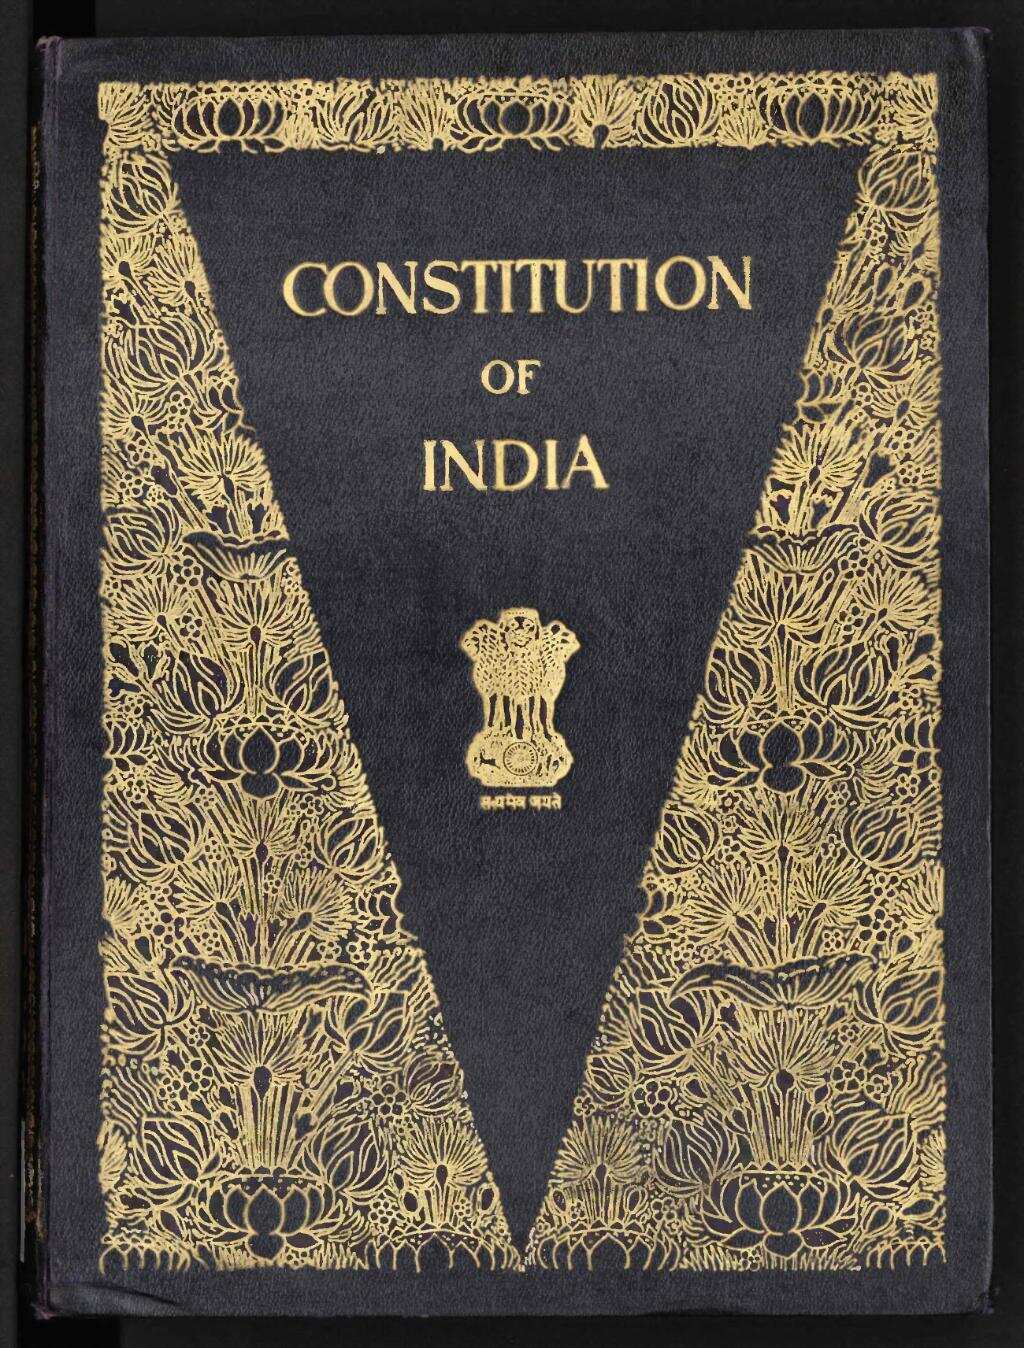 Features Of The Indian Constitution